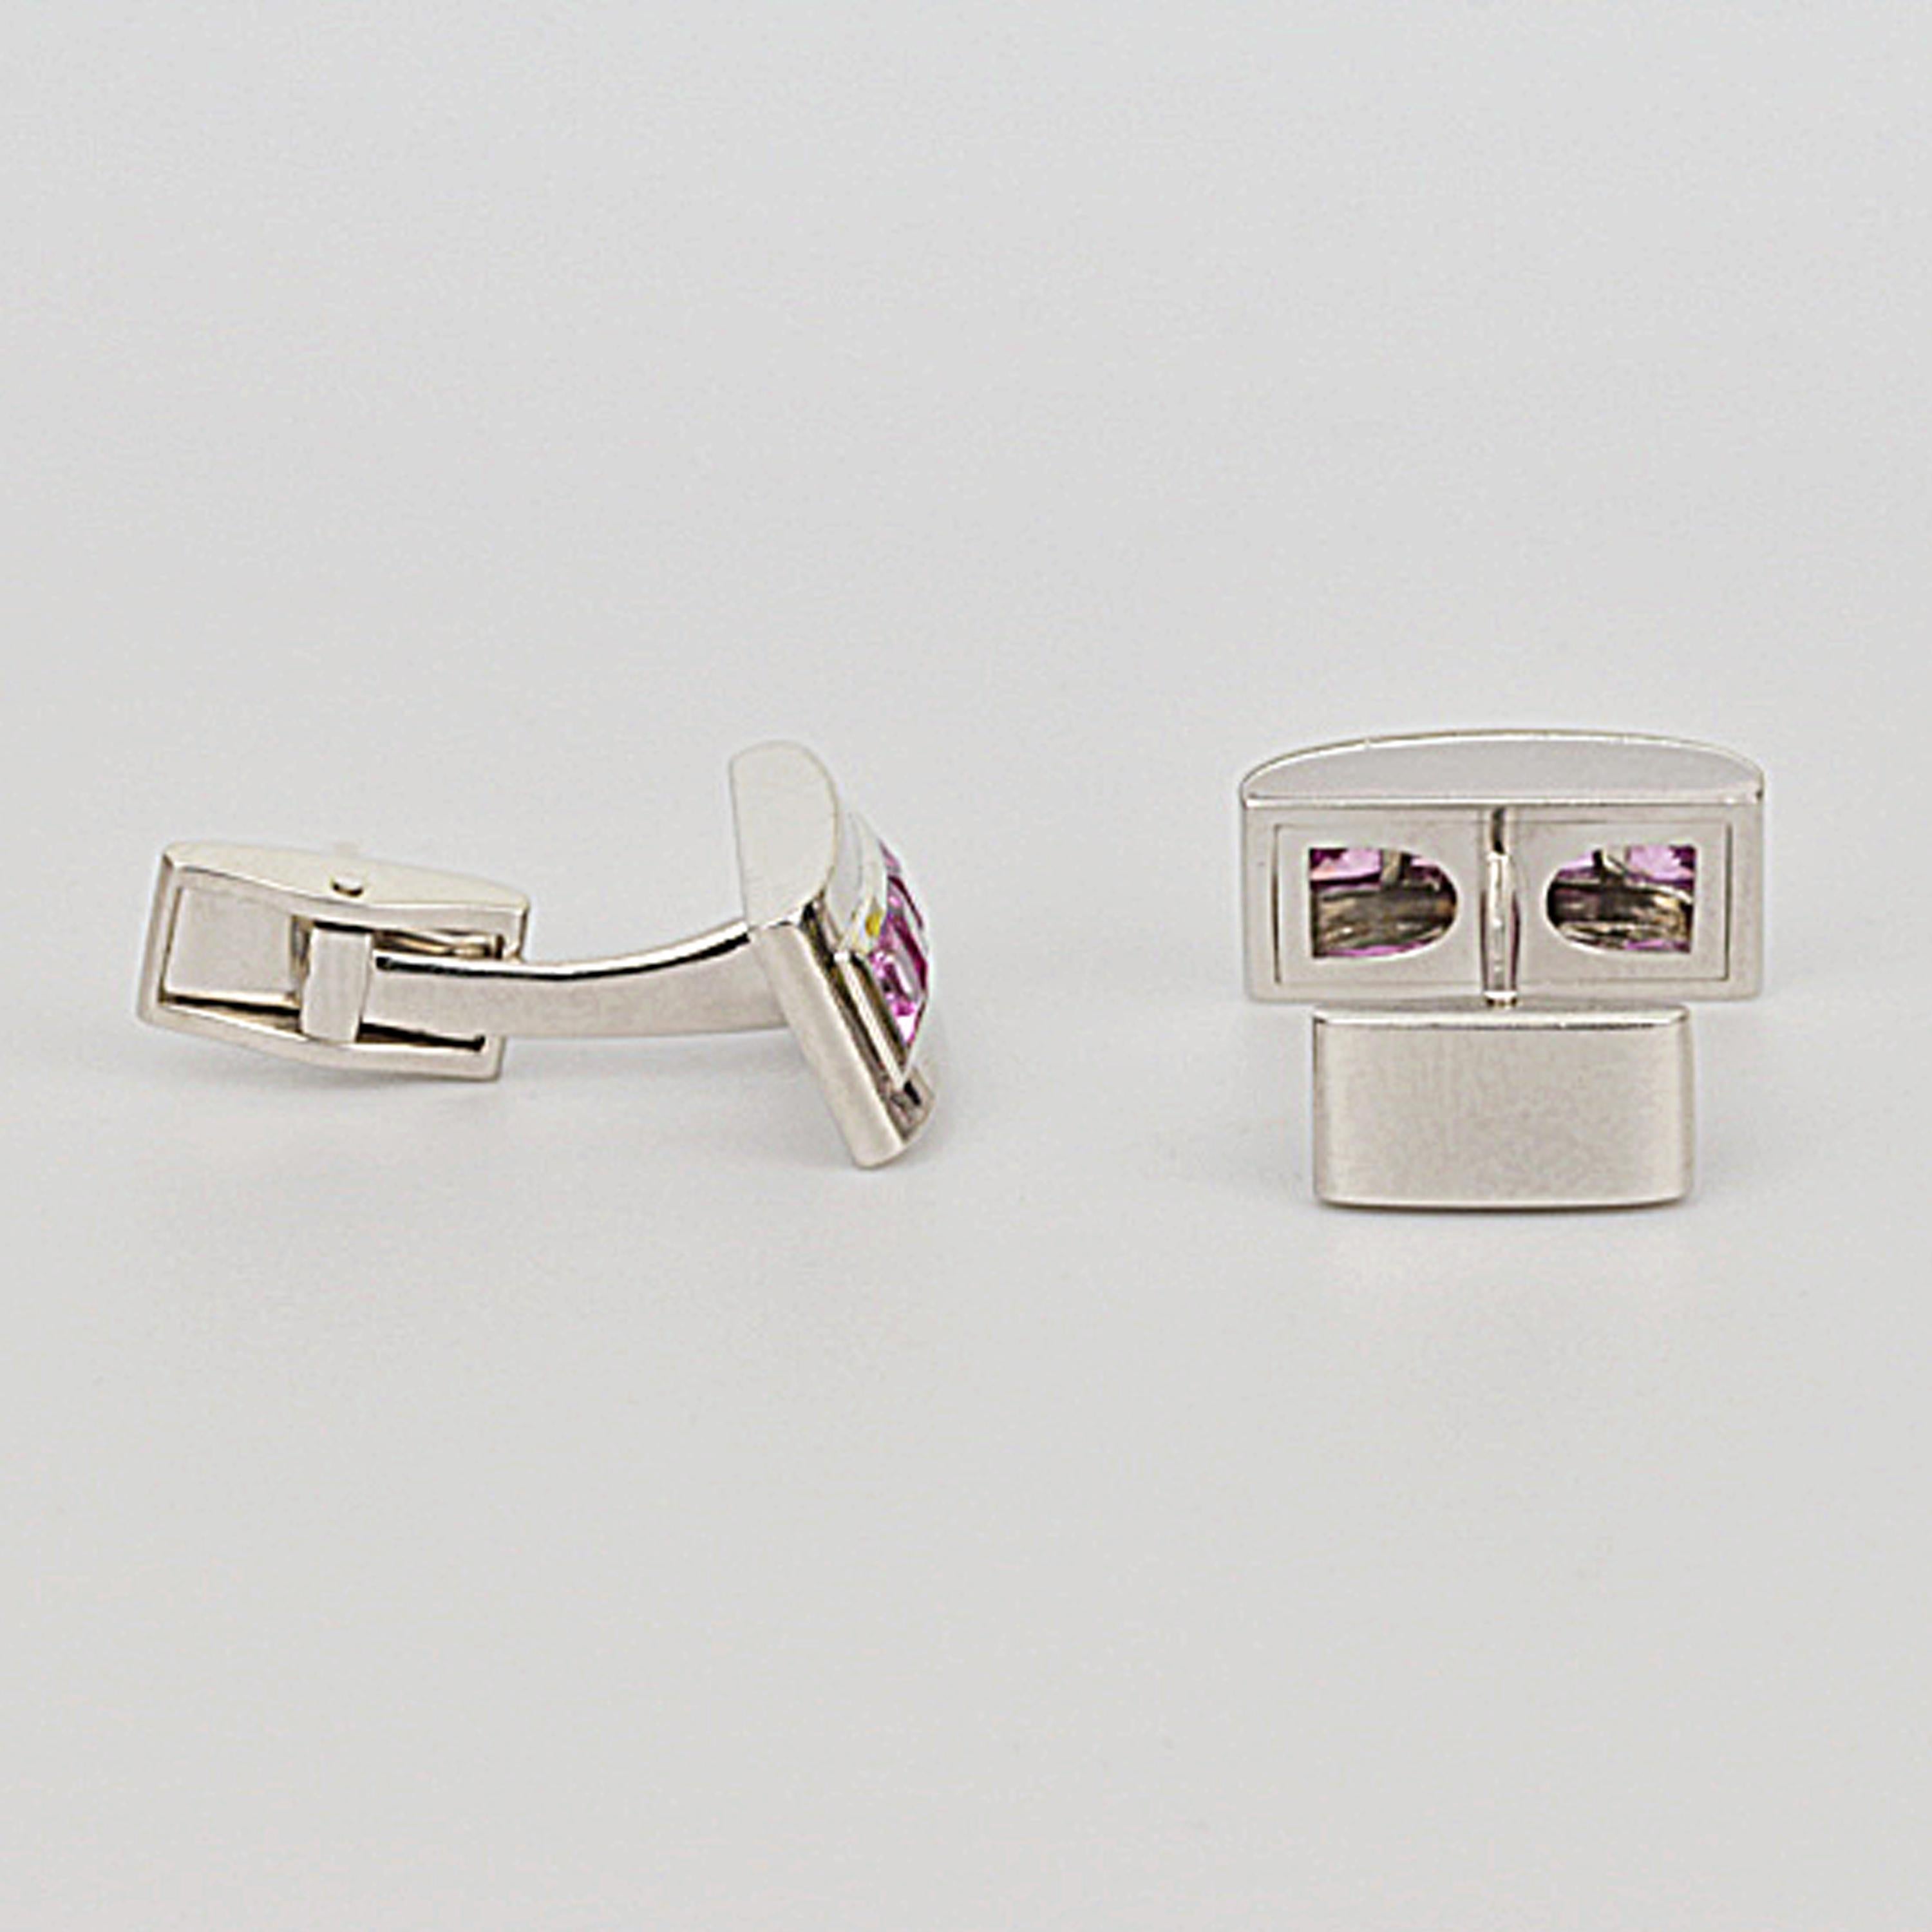 Matthew Cambery 18K white gold cufflinks set with a strip of princess cut pink sapphires. The total weight of the pink sapphires is 2.70ct. T bar fitting.

